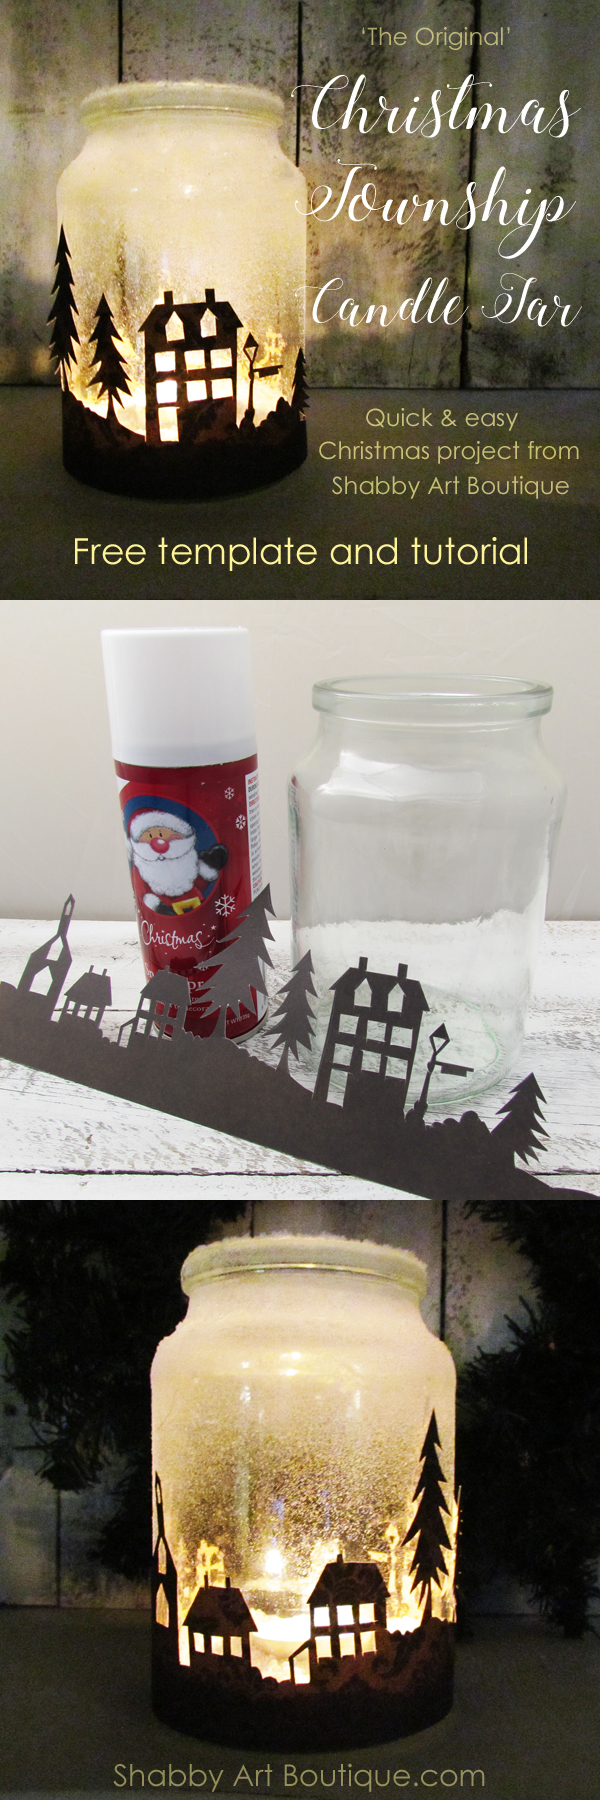 Get the free template and quick and easy tutorial for making the Christmas Township Candle Jar by Shabby Art Boutique. Looks amazing when illuminated at night. Use tealight candles, battery operated candles or battery operated bud lights.